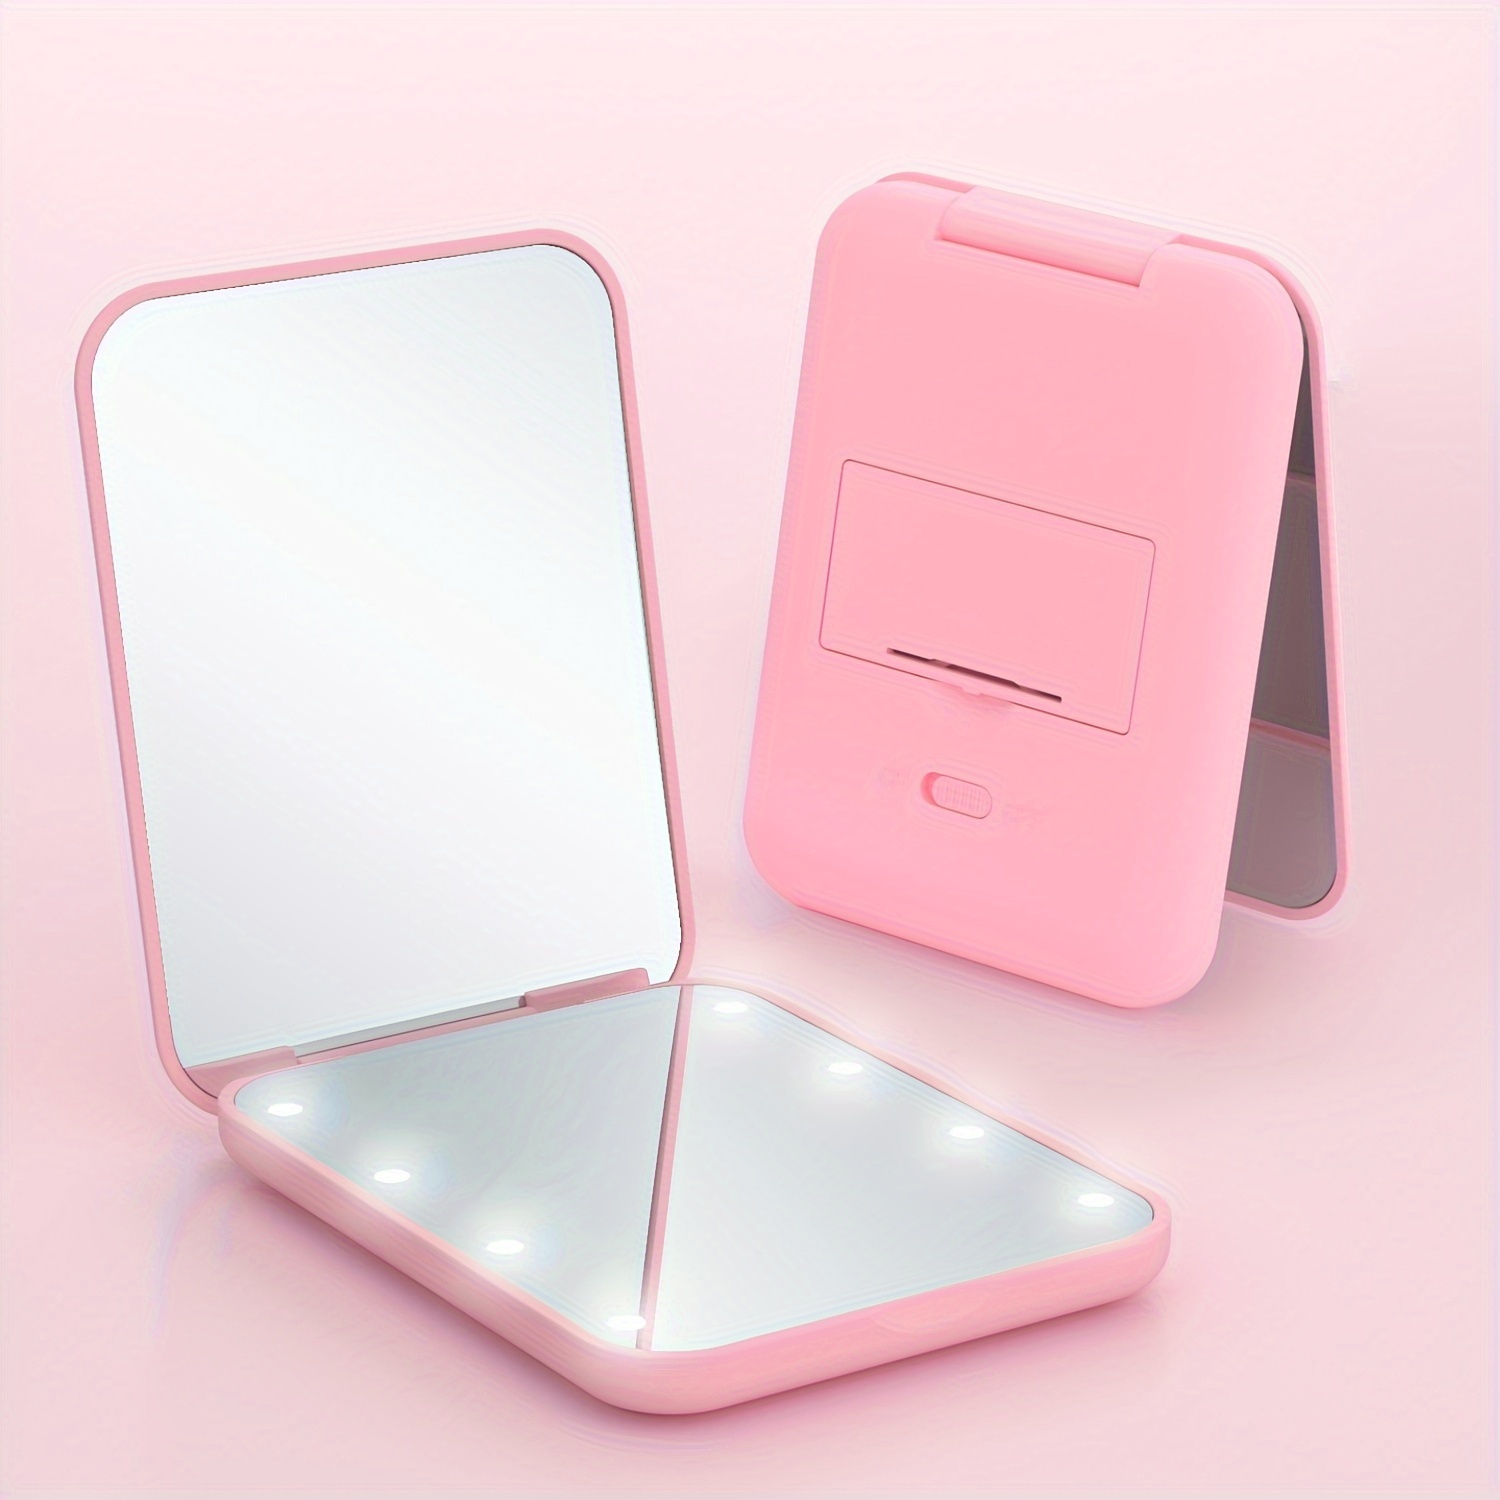 

Pocket Mirror 1x/3x Magnified Led Mini Travel Makeup Mirror, Compact Mirror With Lights, Wallet Mirror, Double-sided, Portable, Folding, Hand-held, Small Lighting Makeup Mirror, Suitable For Gift